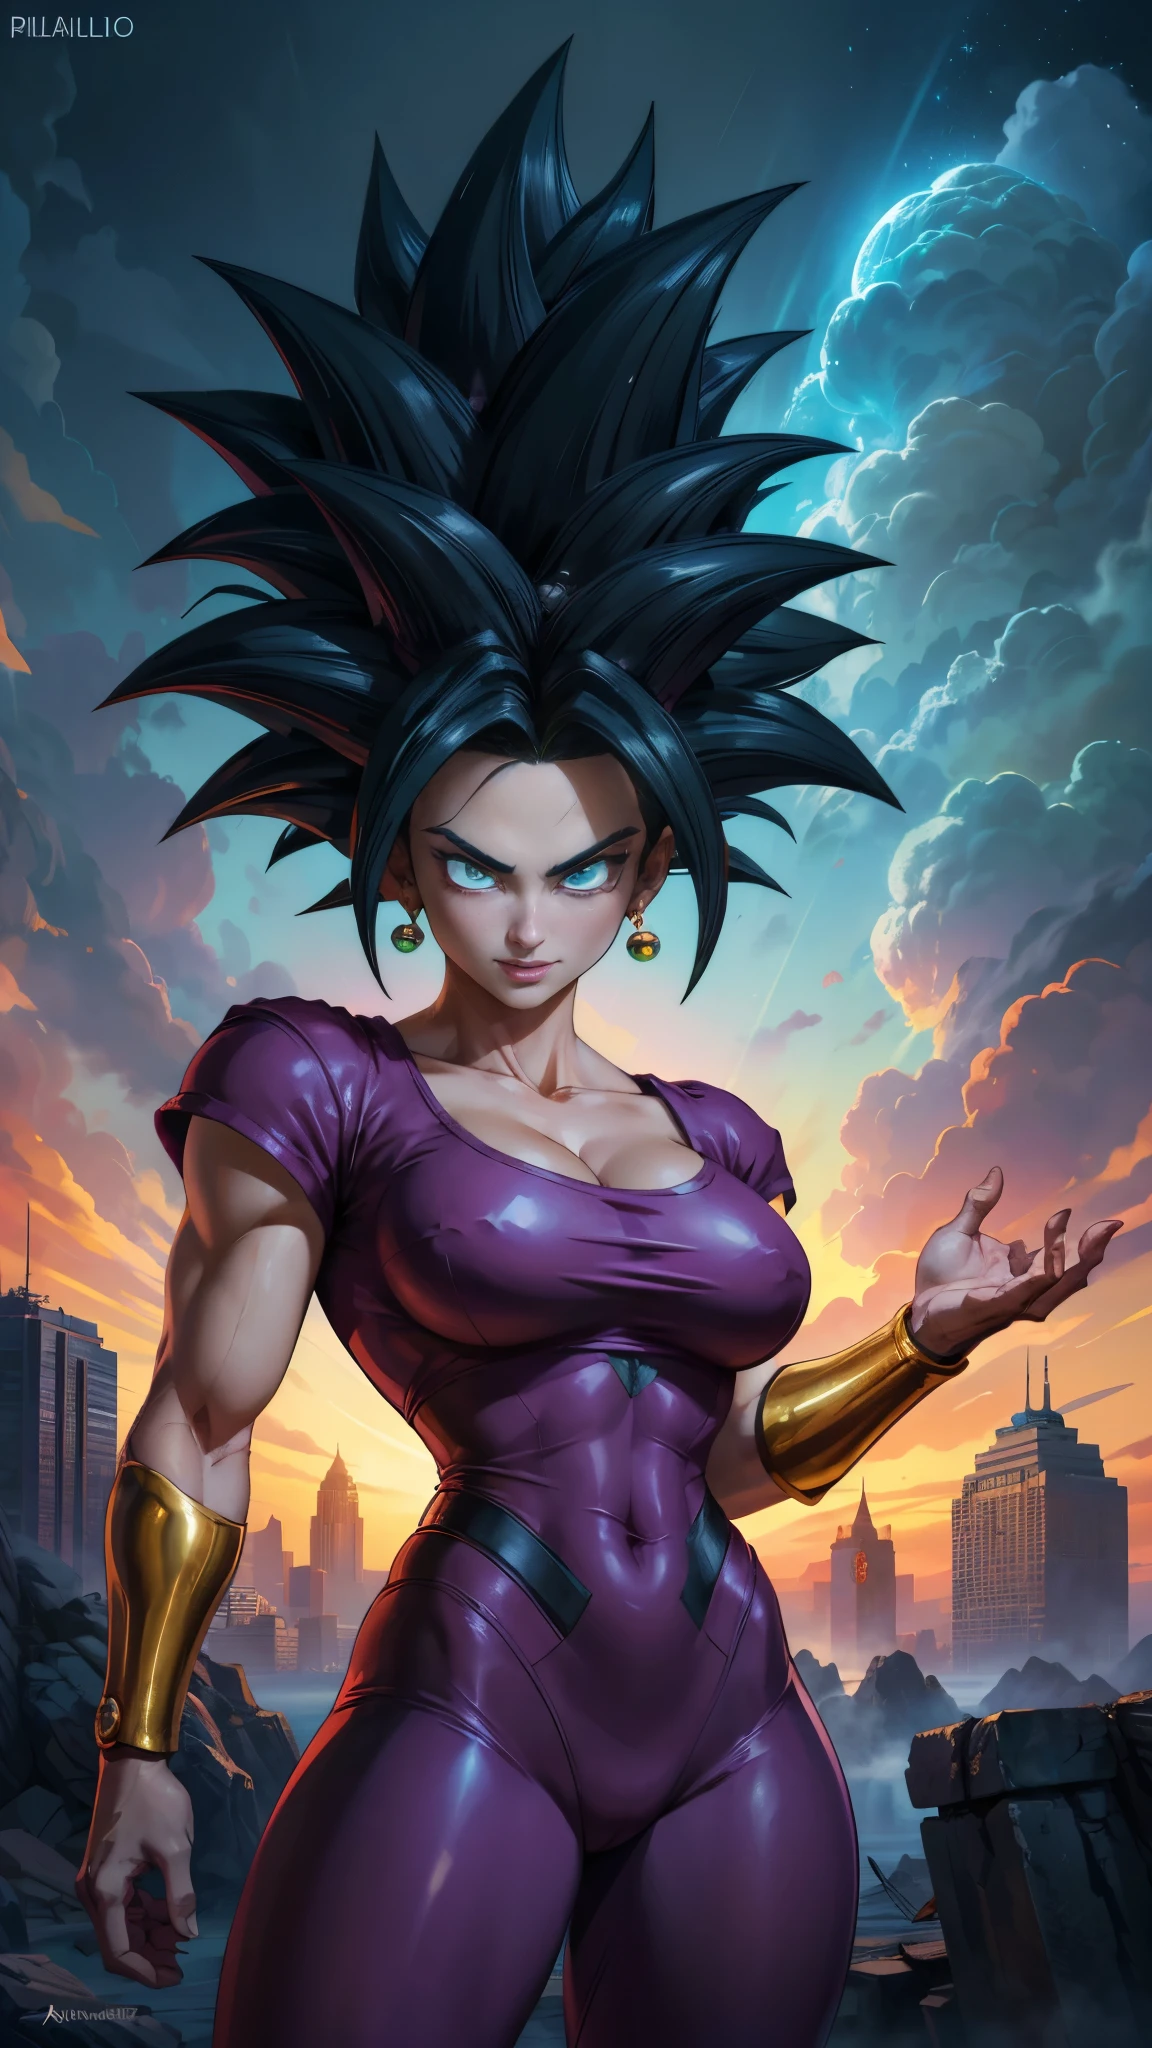  (La Best Quality,A high resolution,Ultra - detailed,actual),Kefla [Dragon Ball Super),green hair, black crop top, (shiny white tights/shackles:1.4),,(Cyberpunk ruined dungeon ruins background :1.4 ), More detailed 8K.unreal engine:1.4,UHD,La Best Quality:1.4, photorealistic:1.4, skin texture:1.4, masterpiece:1.8,first work, Best Quality,object object], (detailed face features:1.3),(The correct proportions),(Beautiful blue eyes),  (dynamic cowboy pose), (Kefla Dragon Ball Super:1.4), (Perfect anatomy :1.4),( cinematic lighting :1.4), (face detailed:1.4 ), (Face details: 1.5, bright blue eyes, beautiful face, pretty eyes, Iris contour, thin lips: 1.5, Thin, sharp pale eyebrows, Long, dark eyelashes, double tabs),